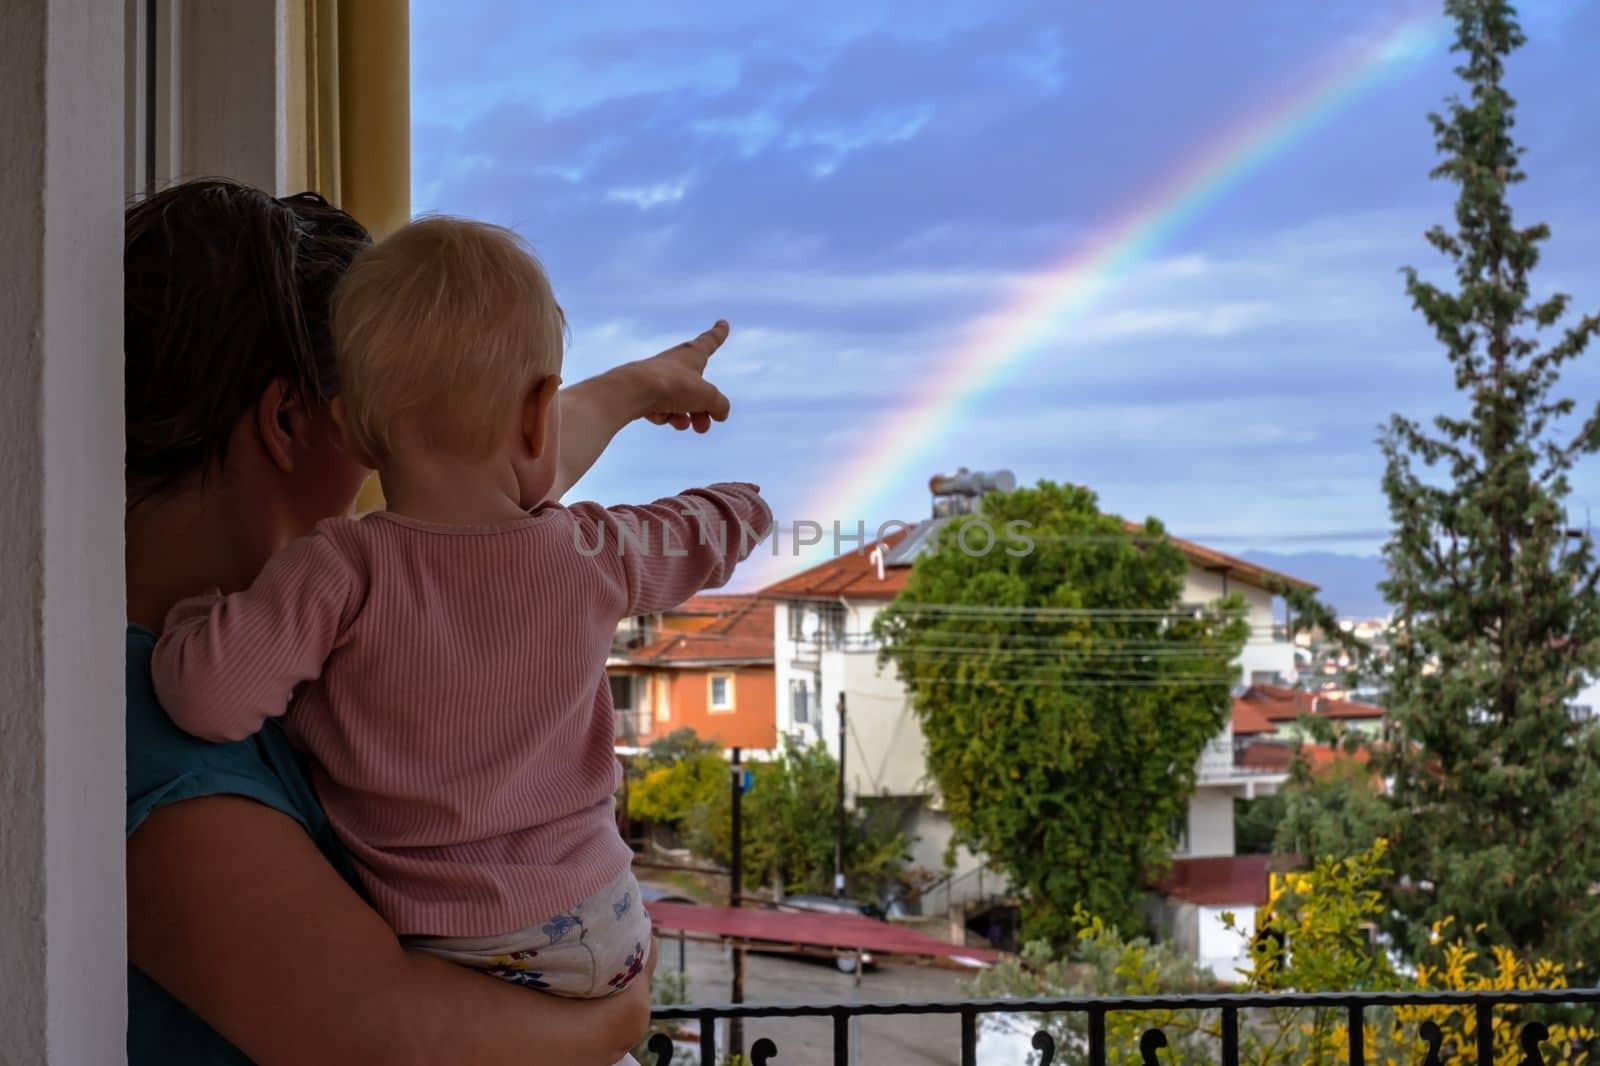 Mother looks at the sky with a baby in her arms, admires the rainbow after the rain, summer is outdoors. 